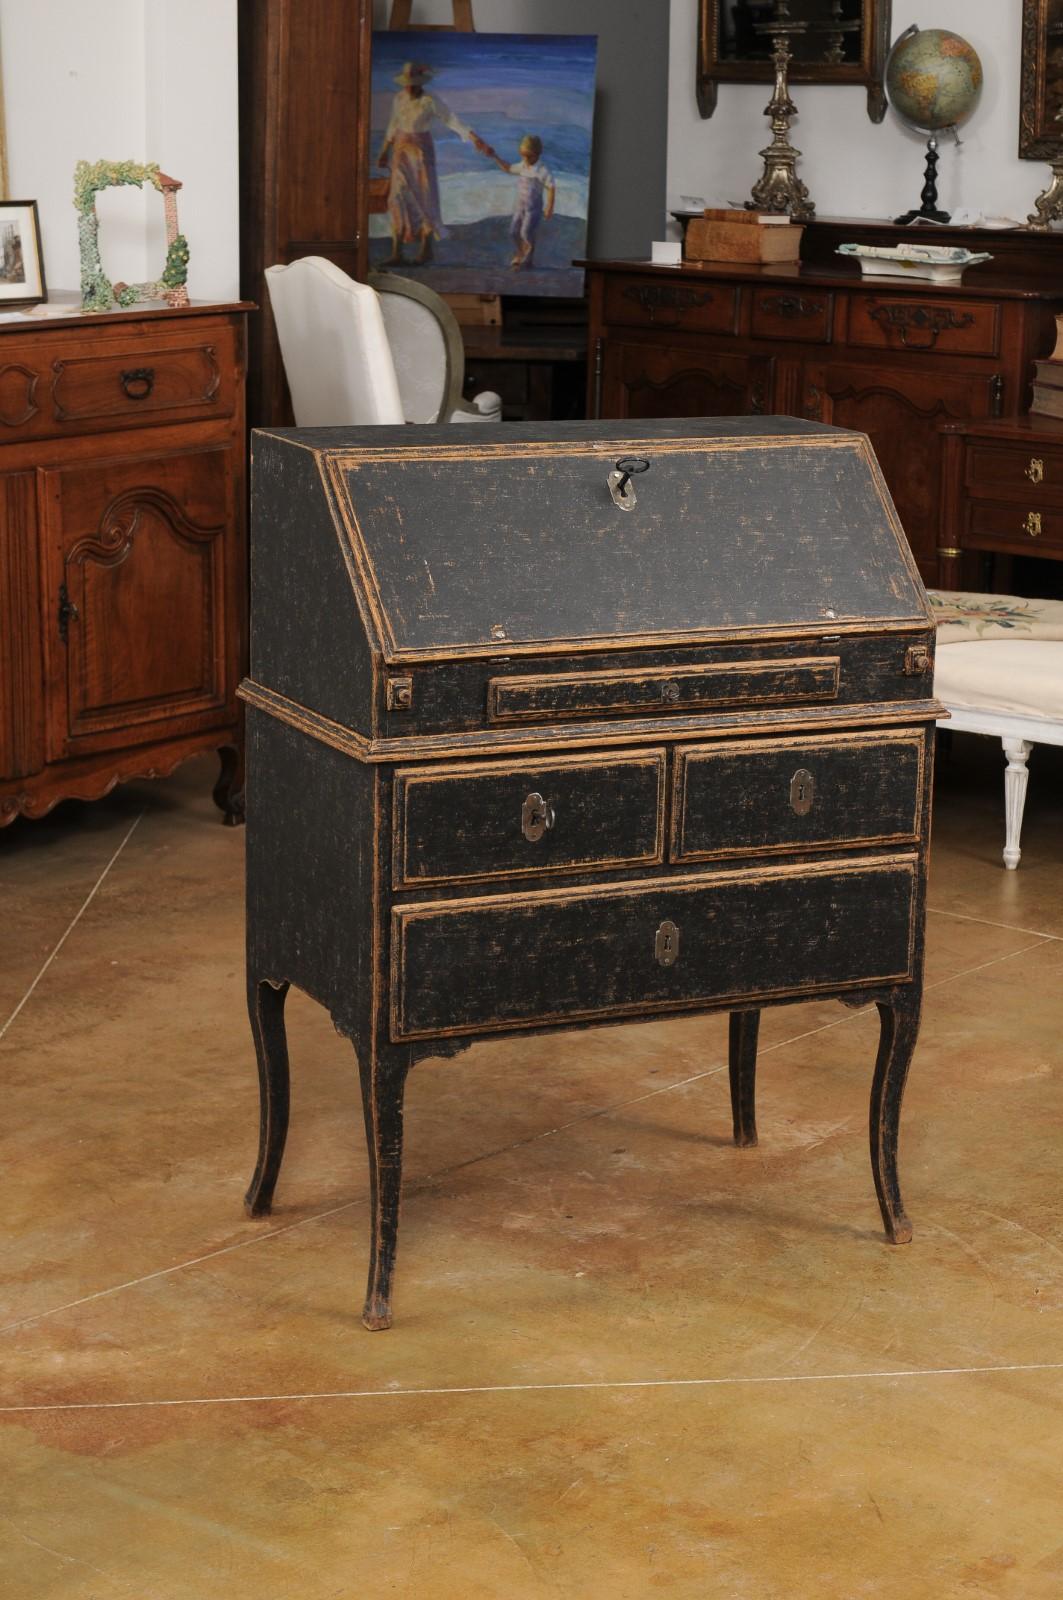 18th Century and Earlier Swedish Rococo Period Slant Front Desk Painted in Black with Distressed Finish